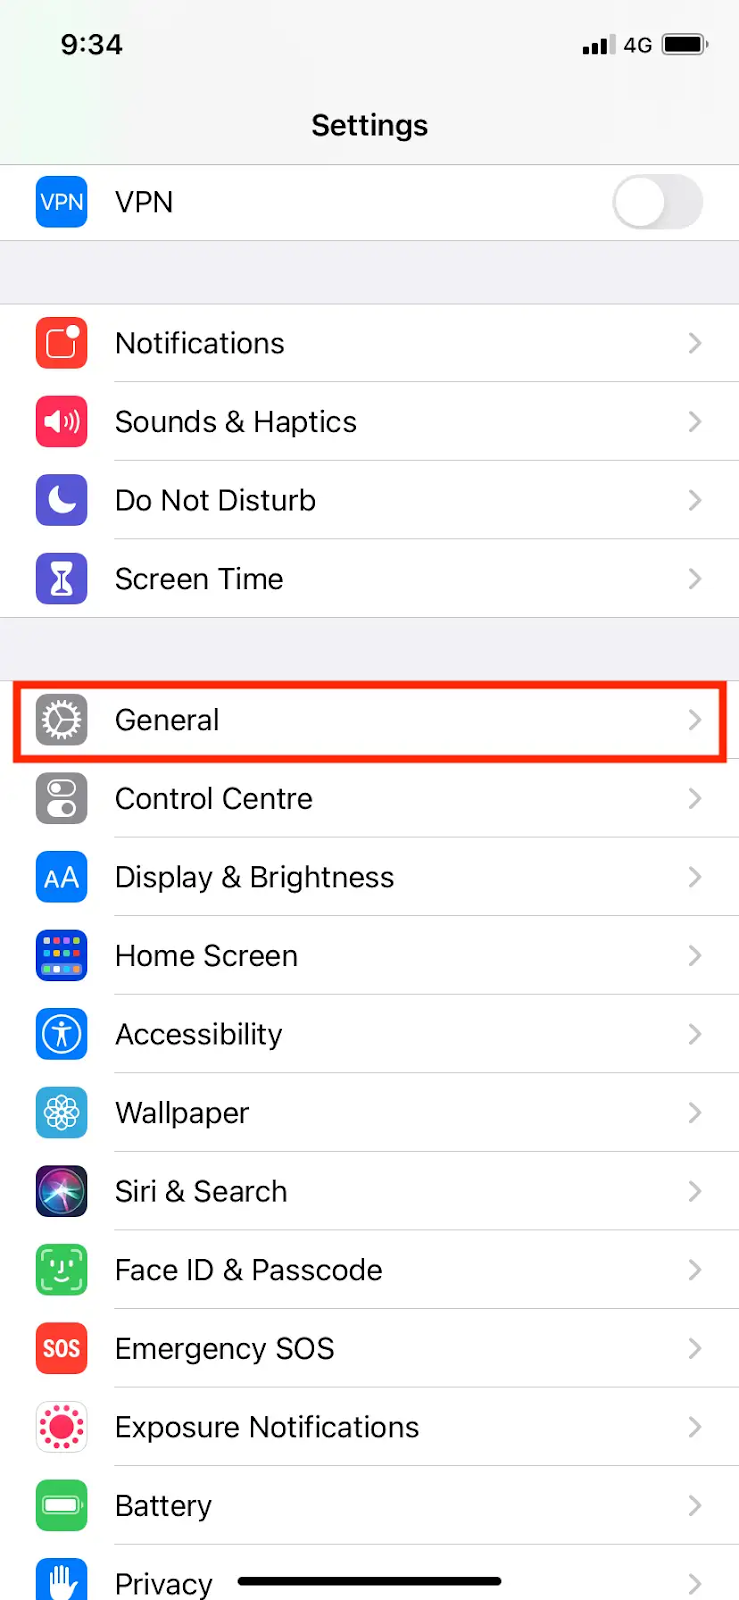 How to Set Up VPN on iPhone